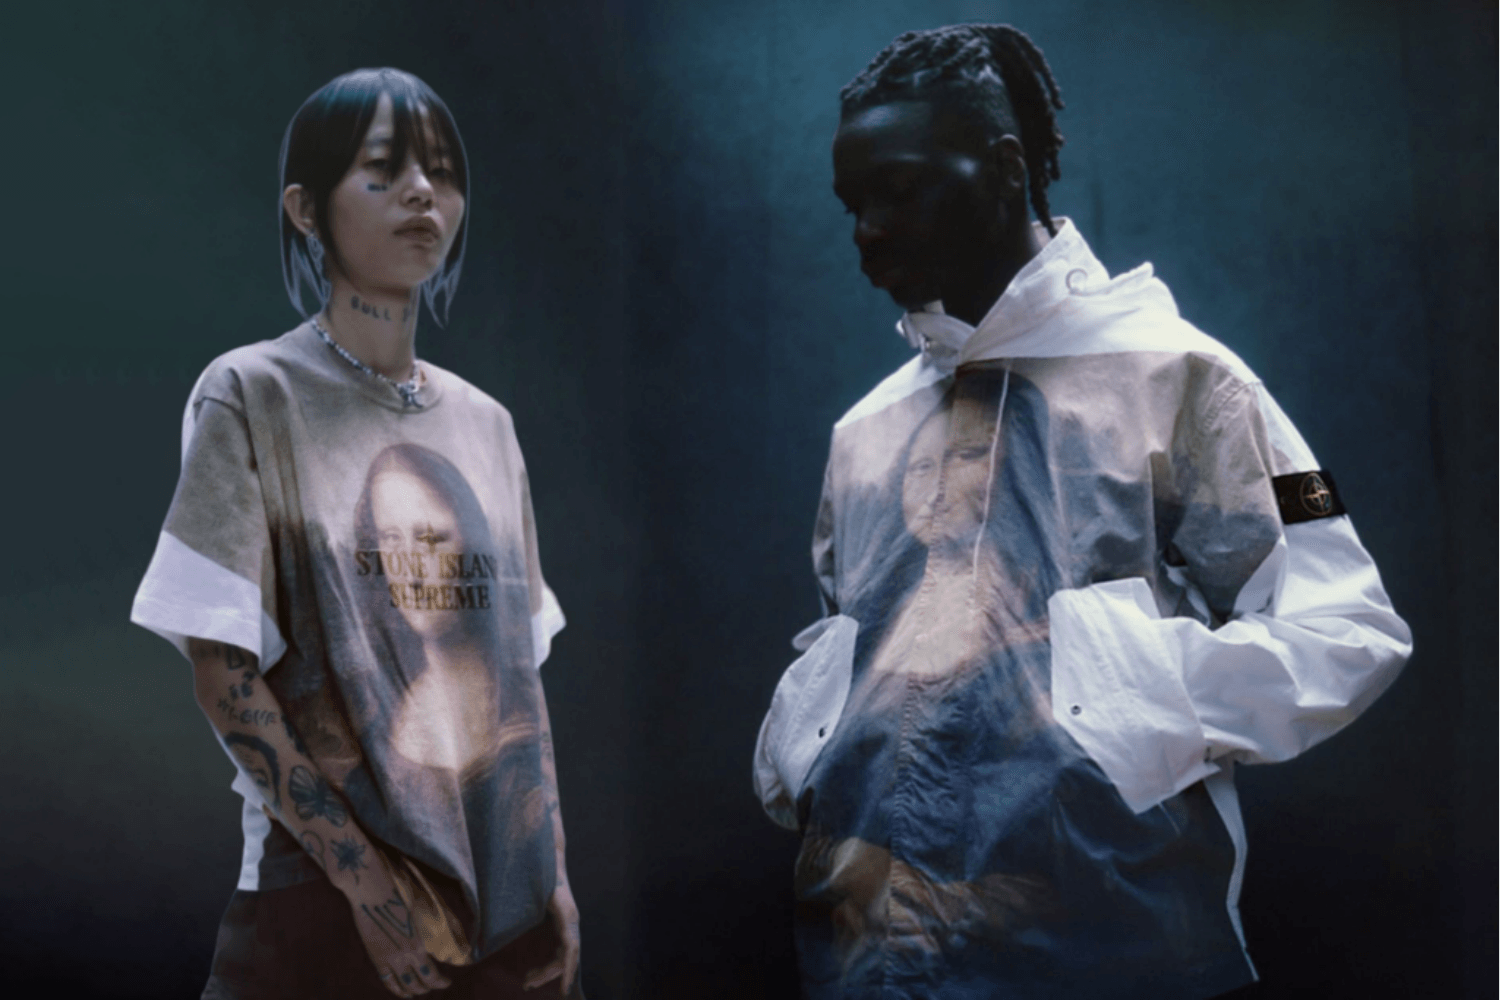 The Supreme X Stone Island Spring 2022 Collection